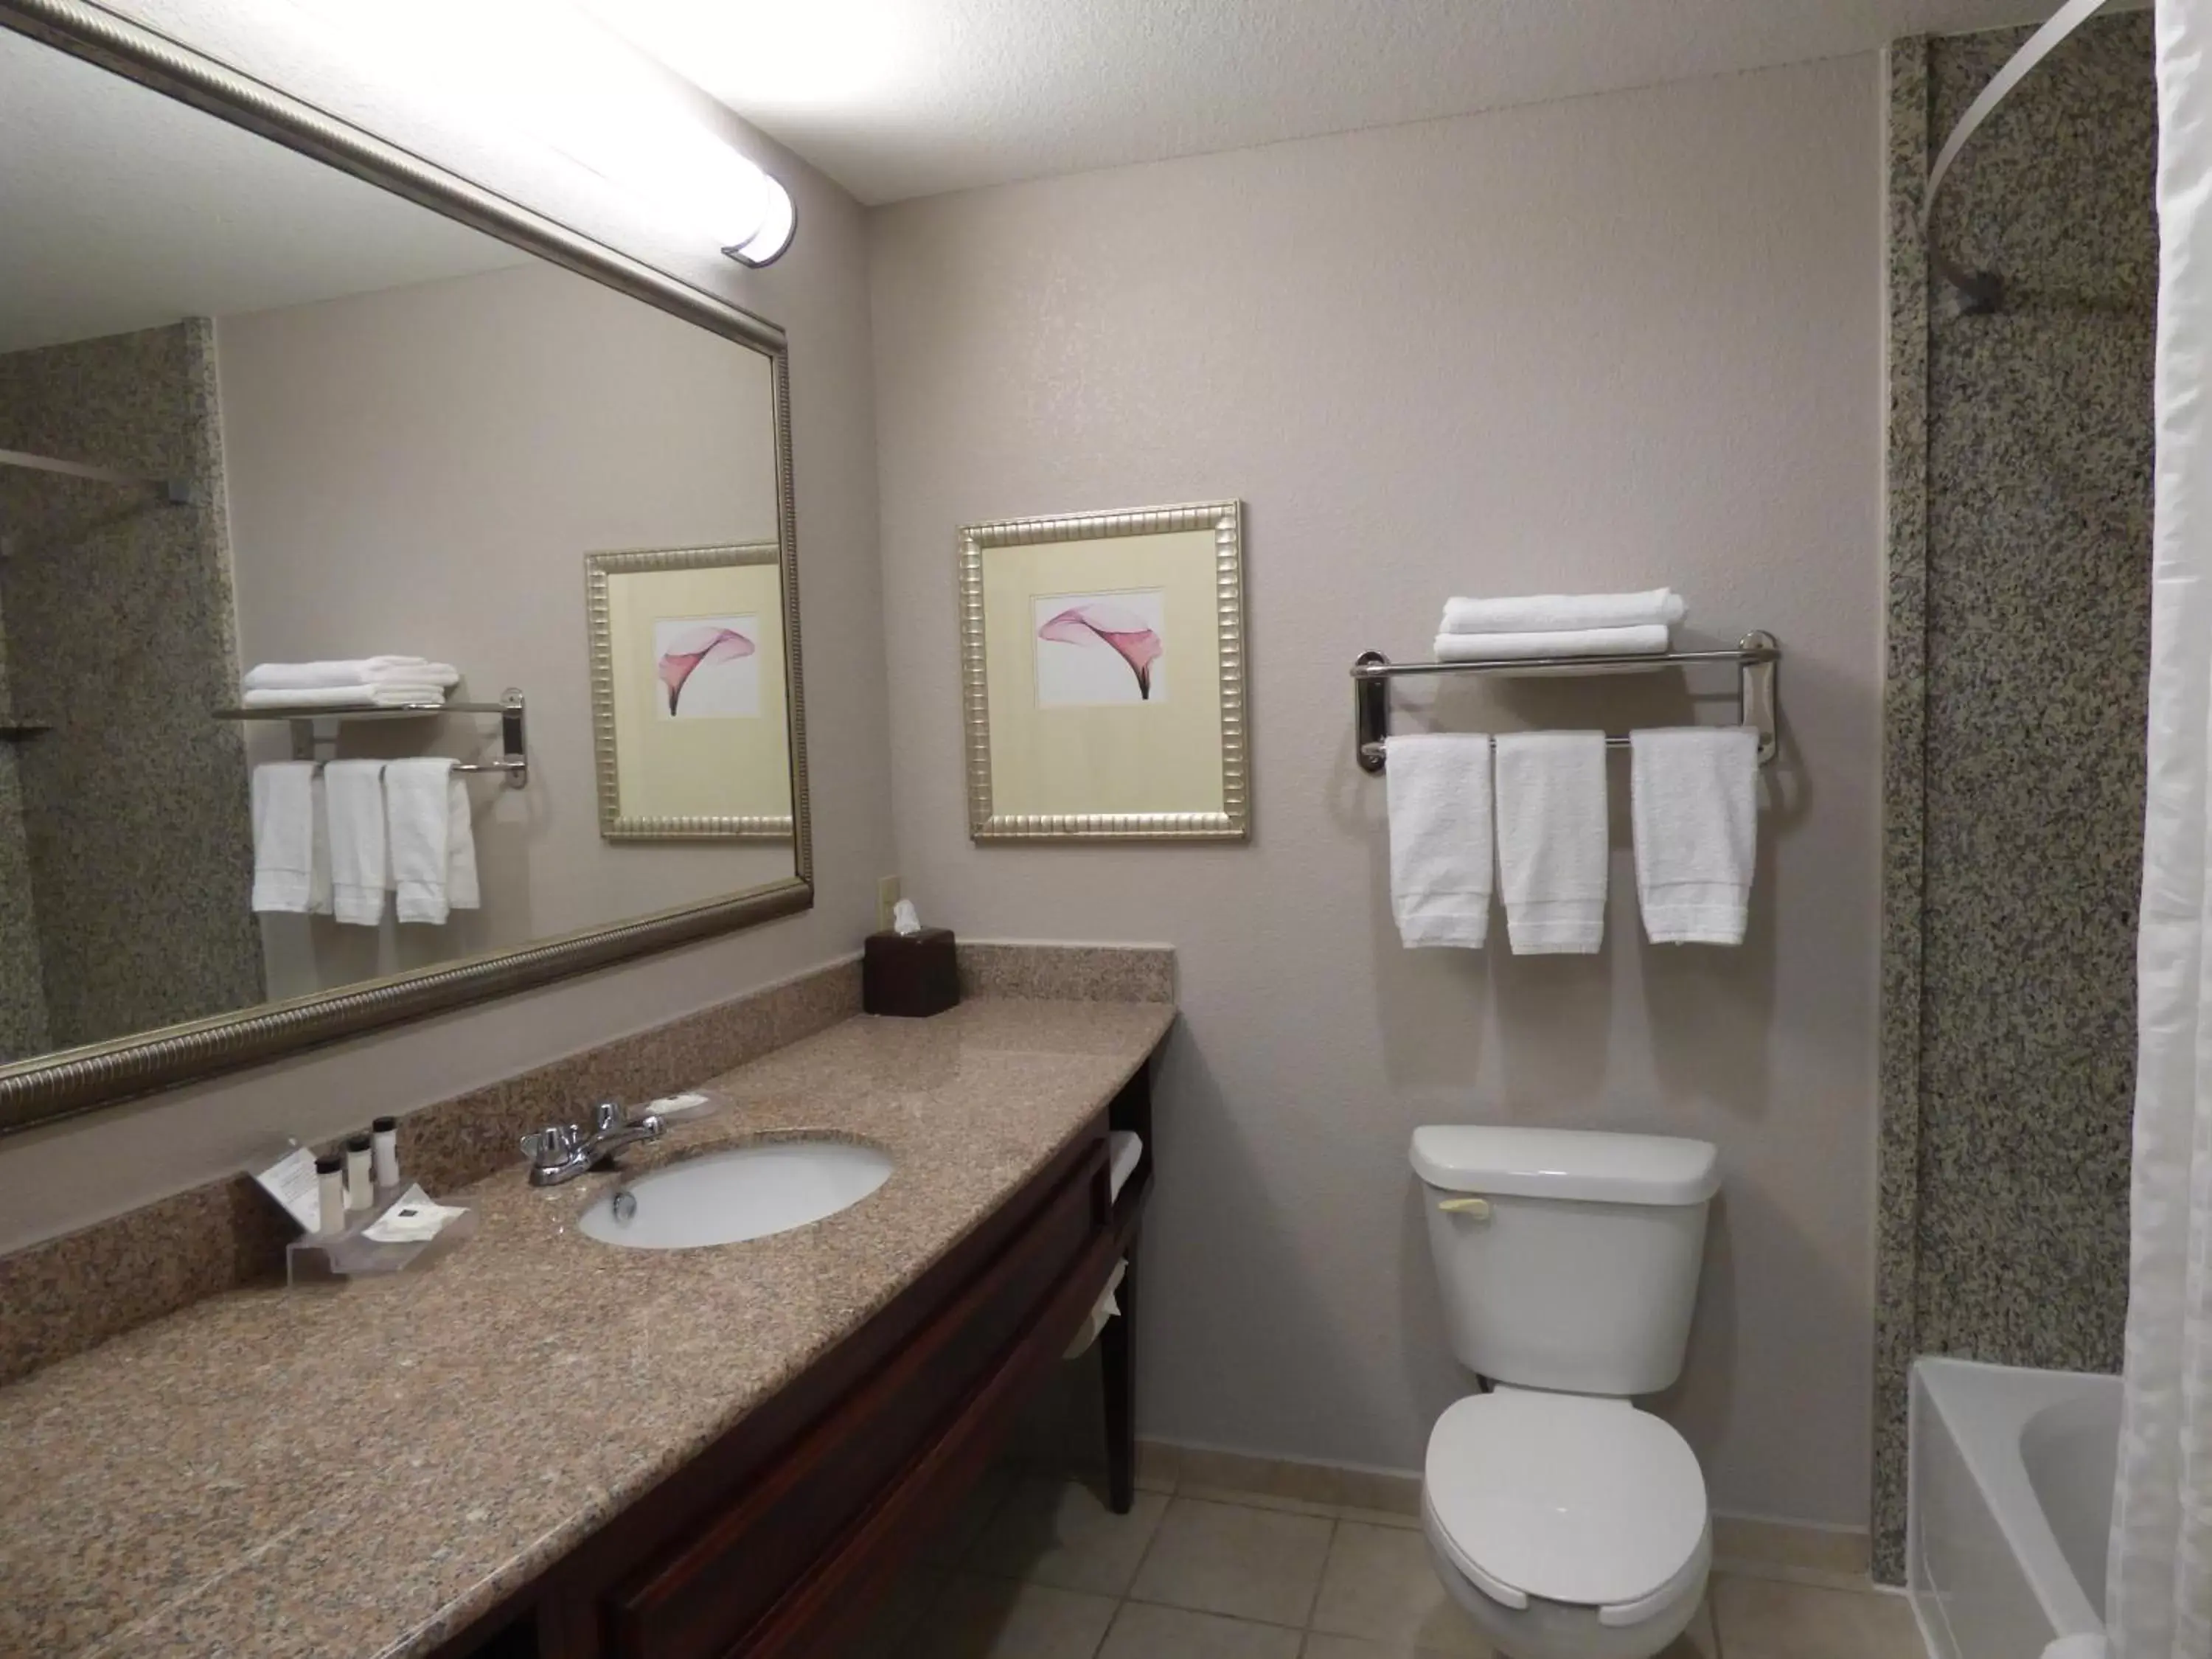 Bathroom in Country Inn & Suites by Radisson, Pensacola West, FL